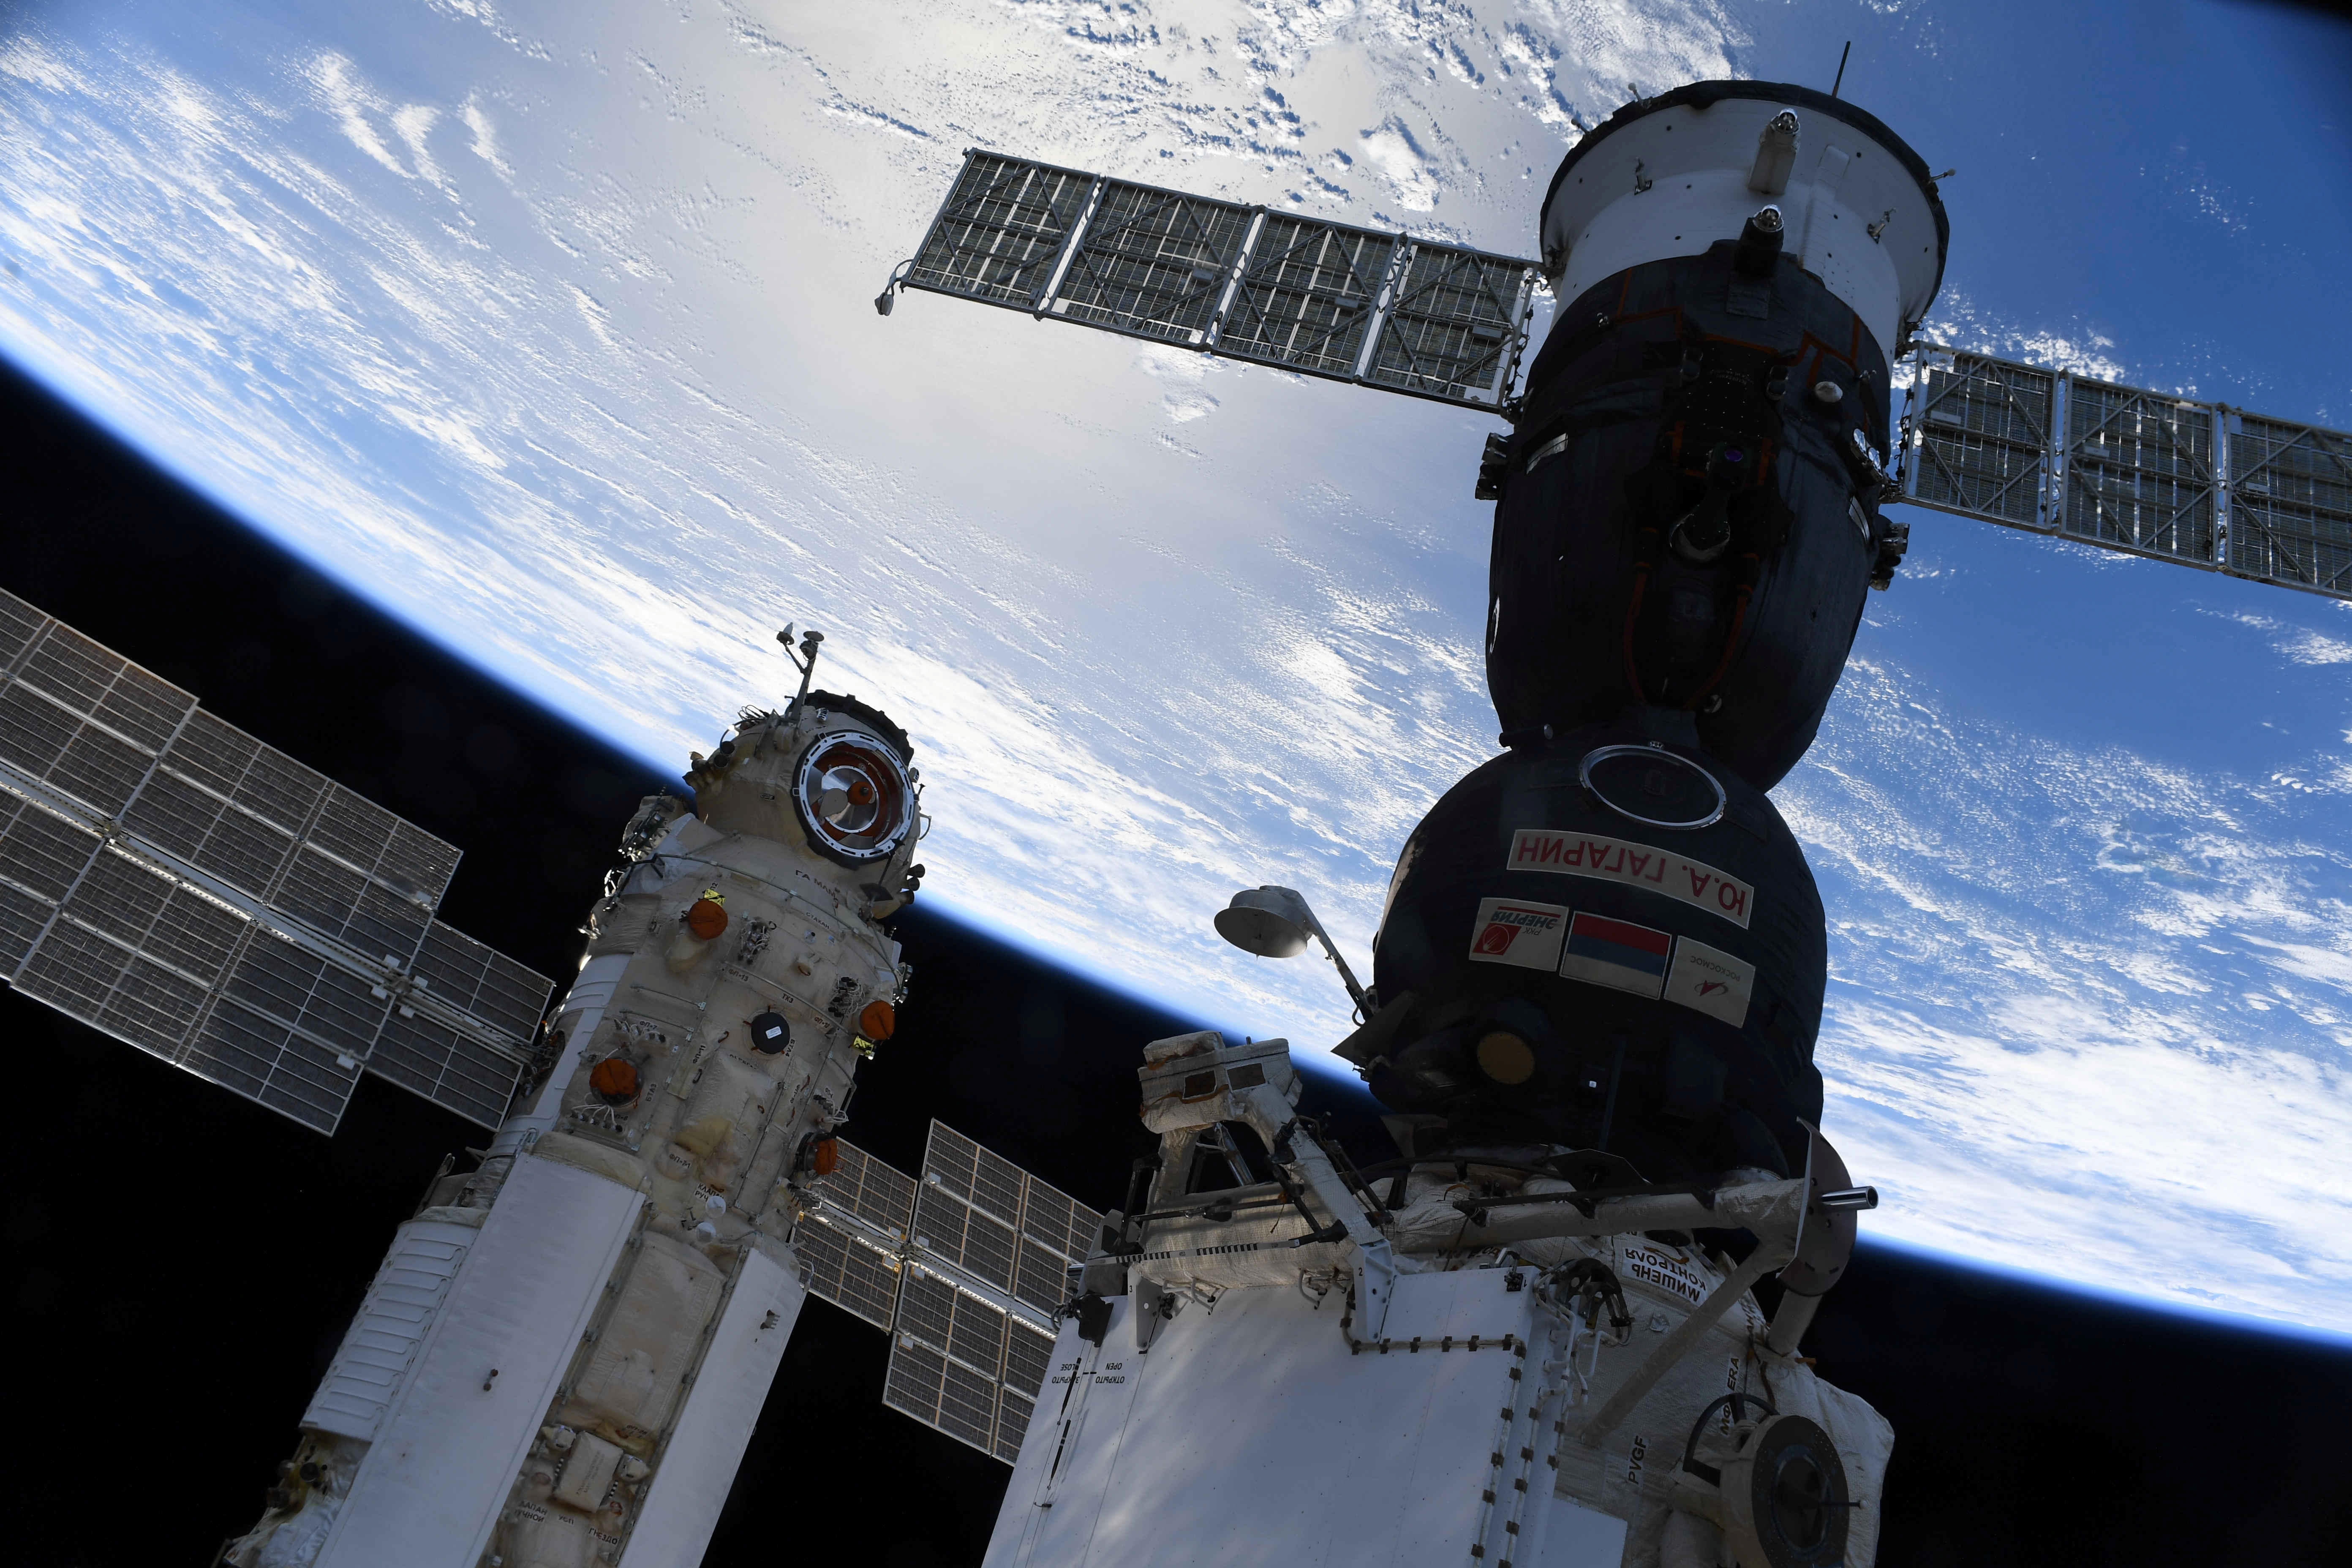 The Nauka (Science) Multipurpose Laboratory Module is seen docked to the International Space Station (ISS)